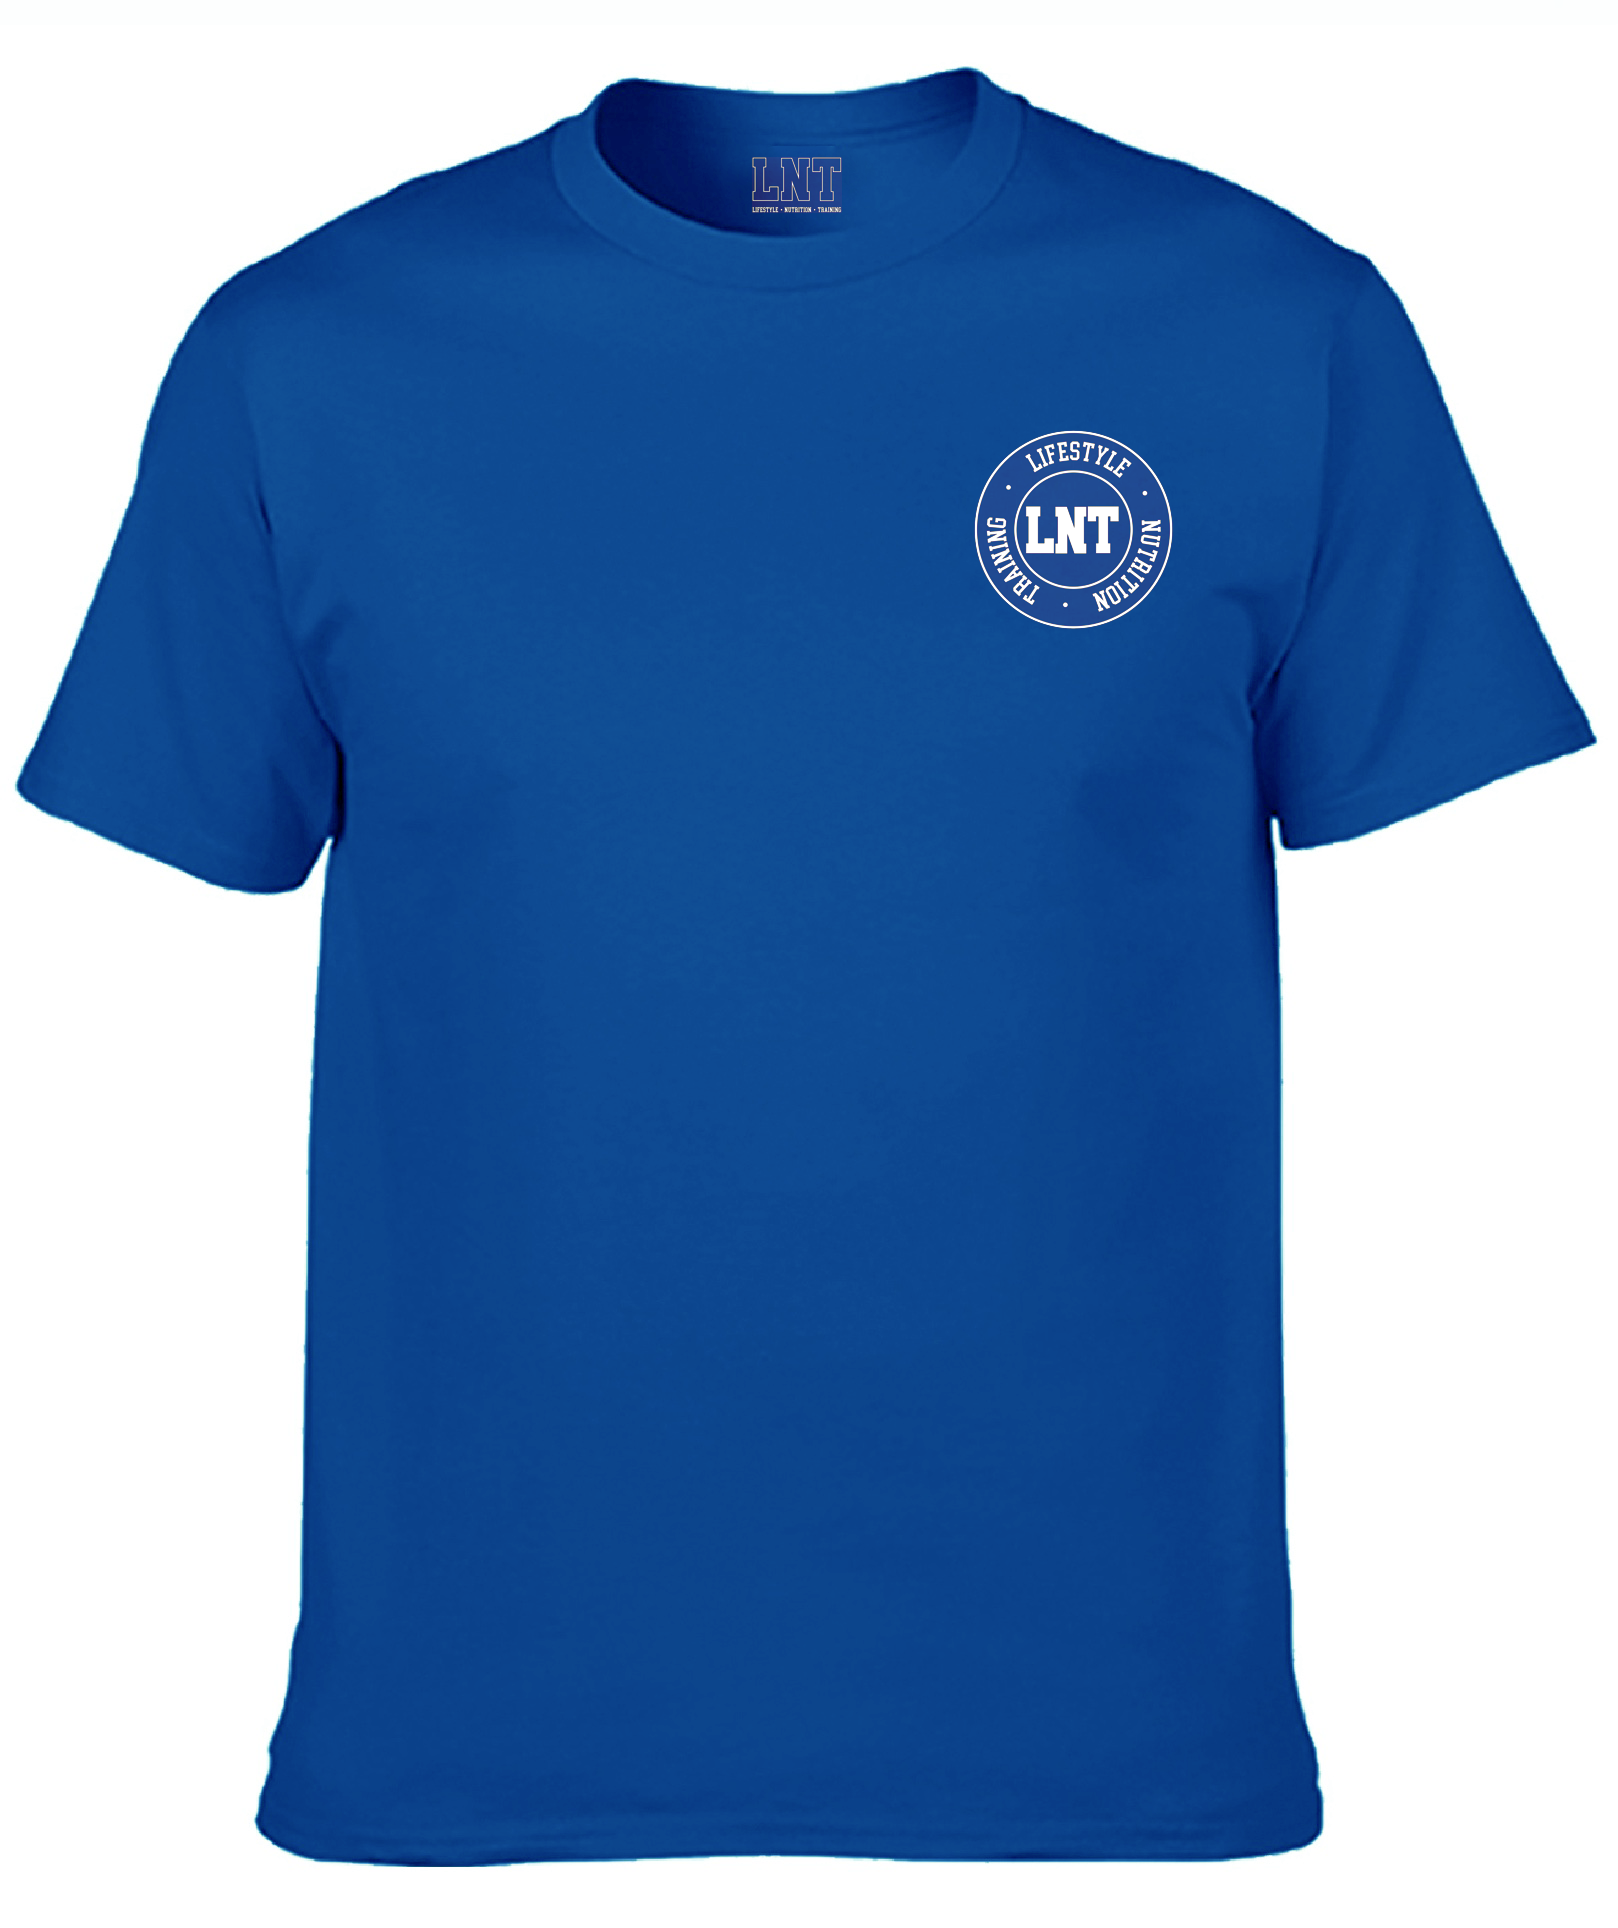 LNT t-shirt in azure blue – Lifestyle Nutrition and Training